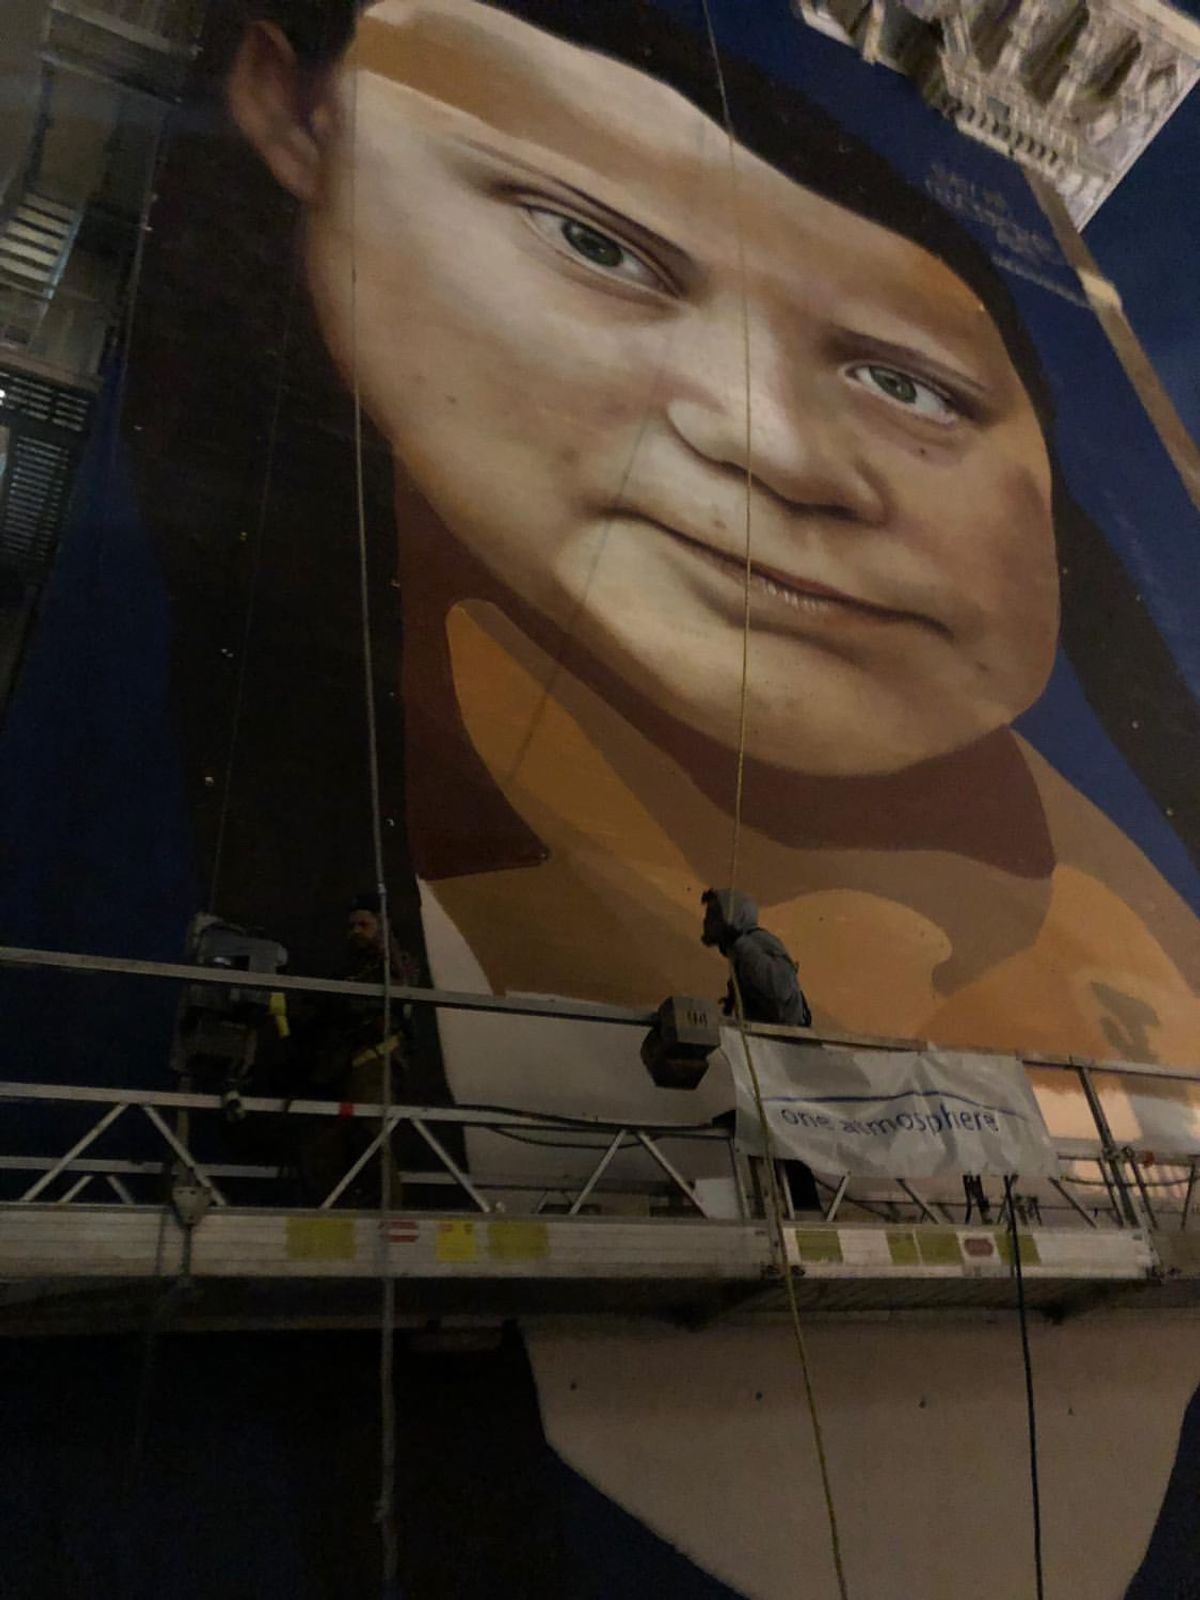 The artist Argentine Andrés Petroselli, known as Cobre, is not getting paid for his depiction of Greta Thunberg in San Francisco Courtesy of the artist